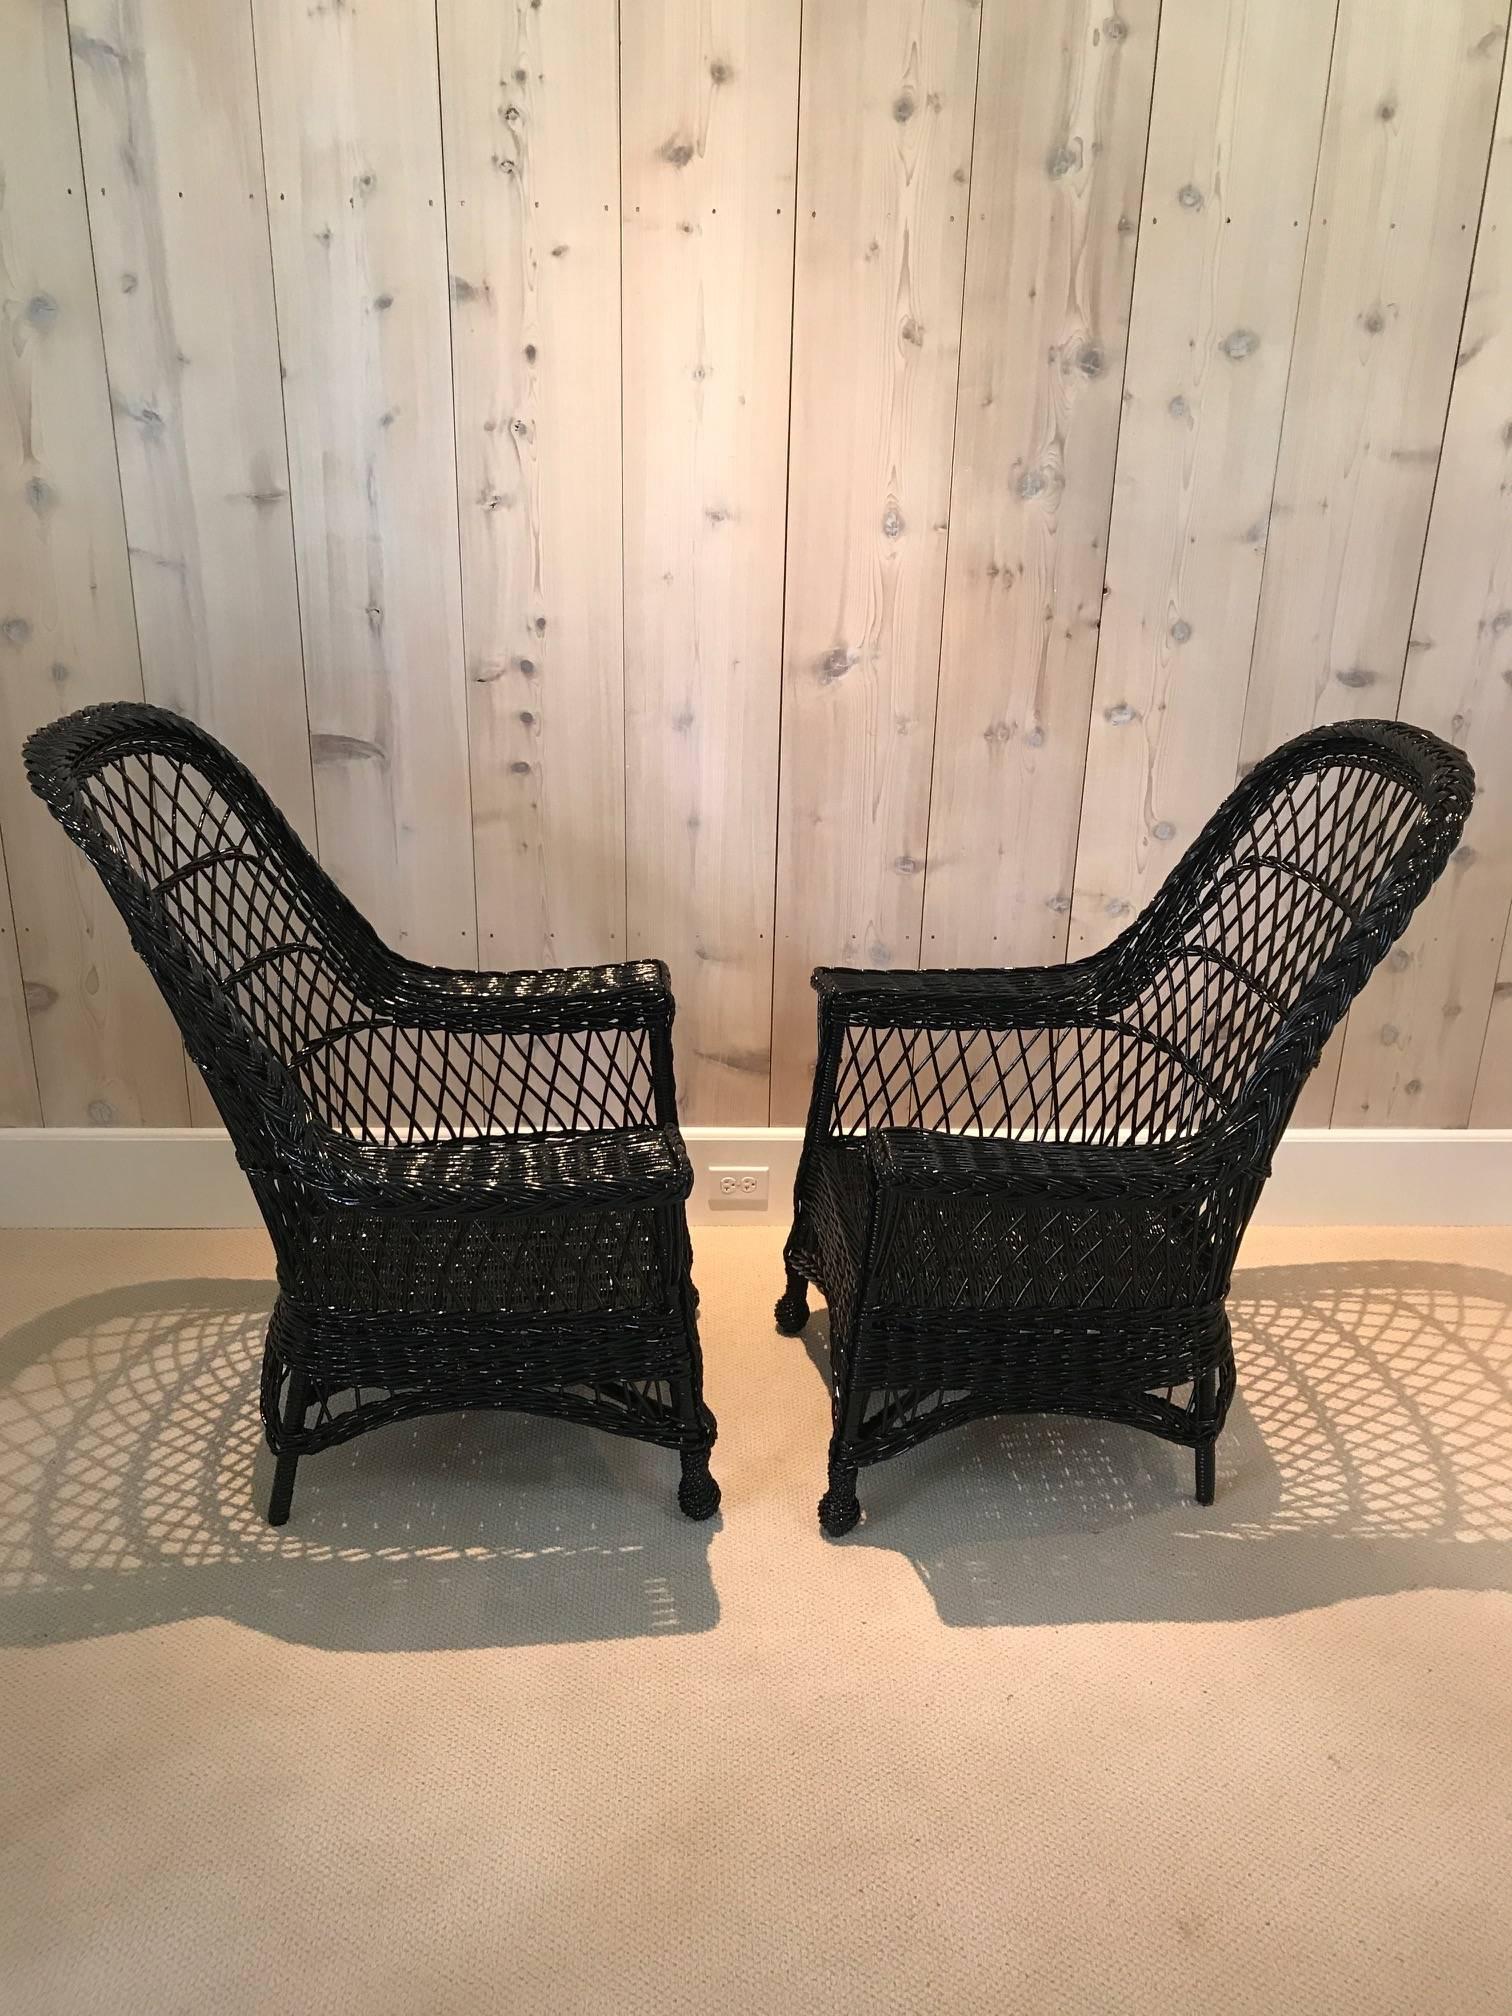 A pair of antique wicker chairs woven of willow by Paine Furniture in fresh black paint.